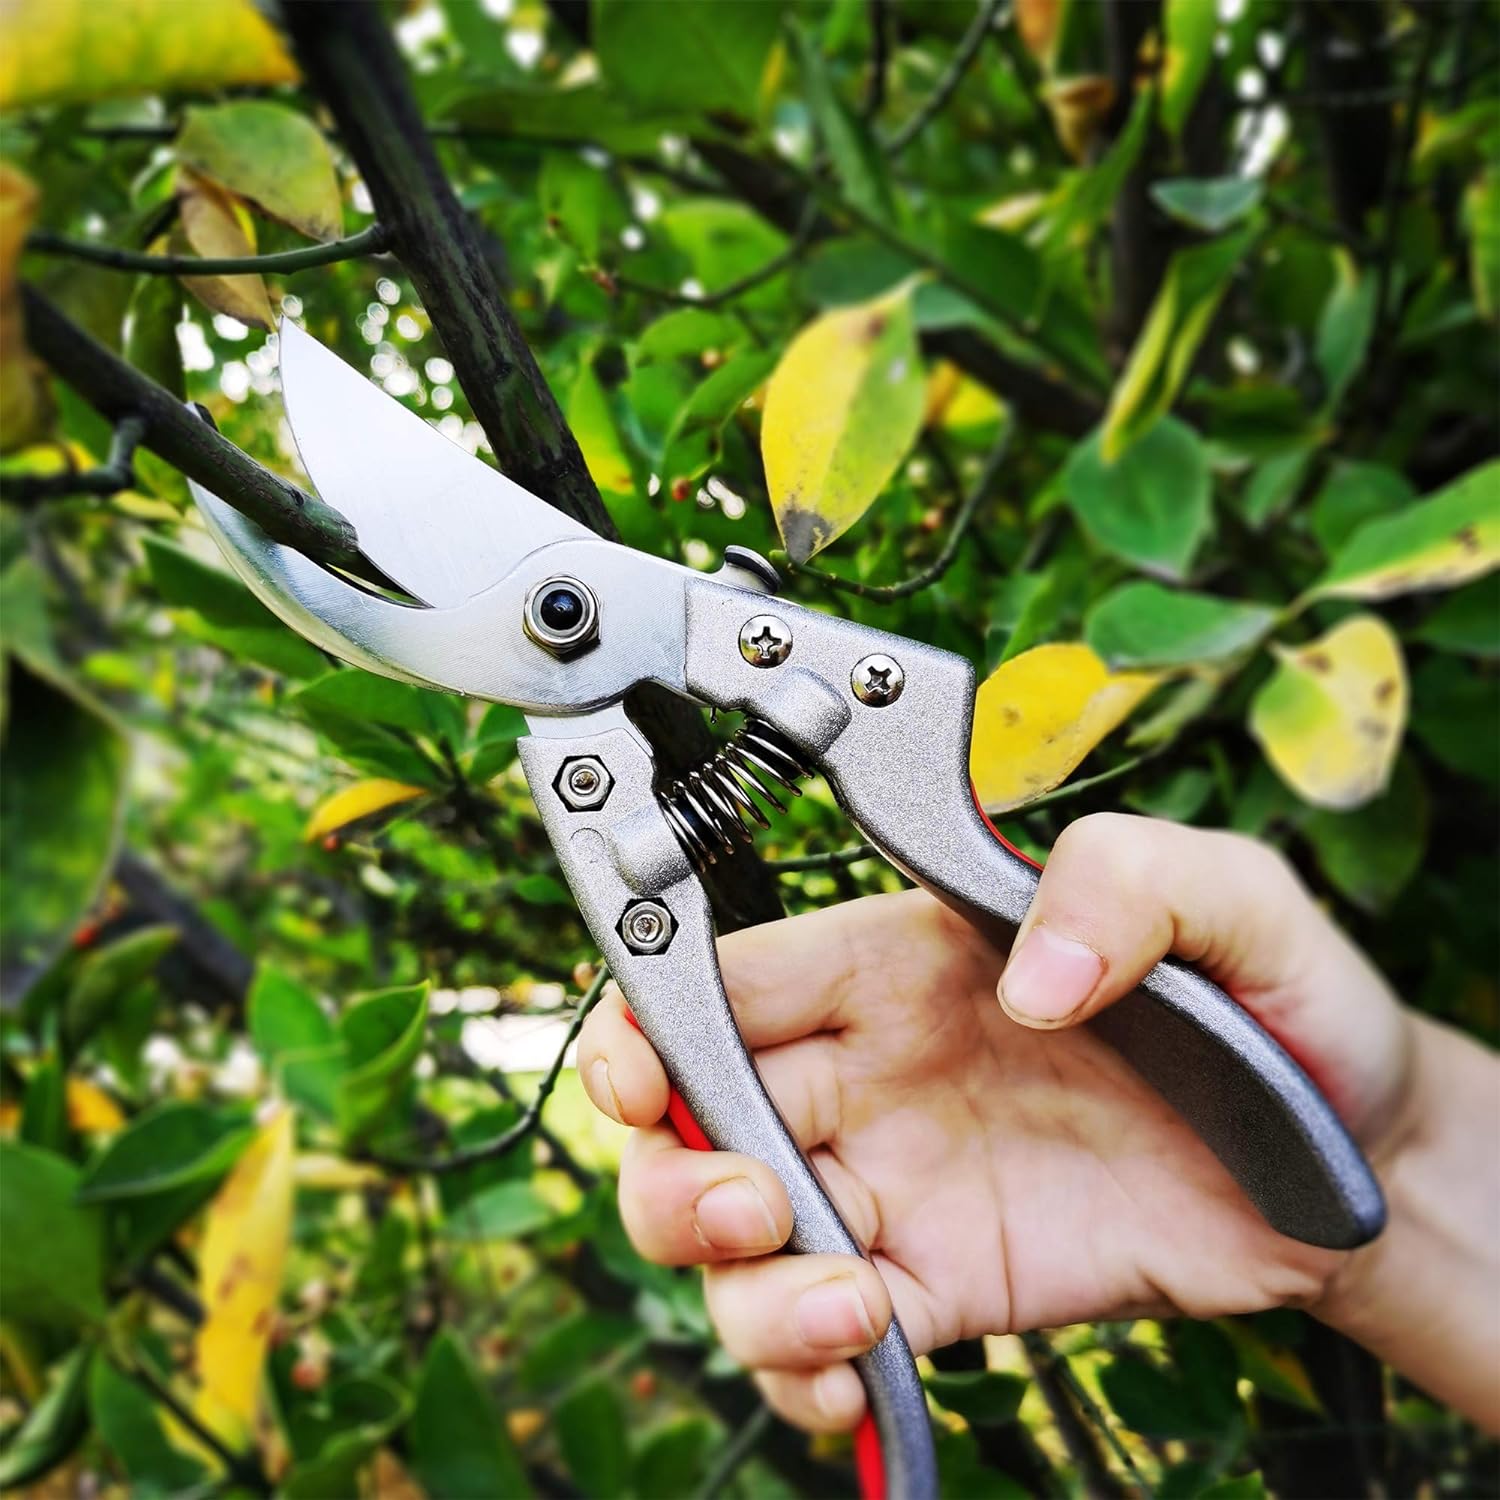 CyberGenZ Anvil Pruning Shears - 8 Garden Shears Pruning, Heavy Duty  Garden Clippers Handheld with Blue Adjustable Grip, Gardening Pruners Tool  for